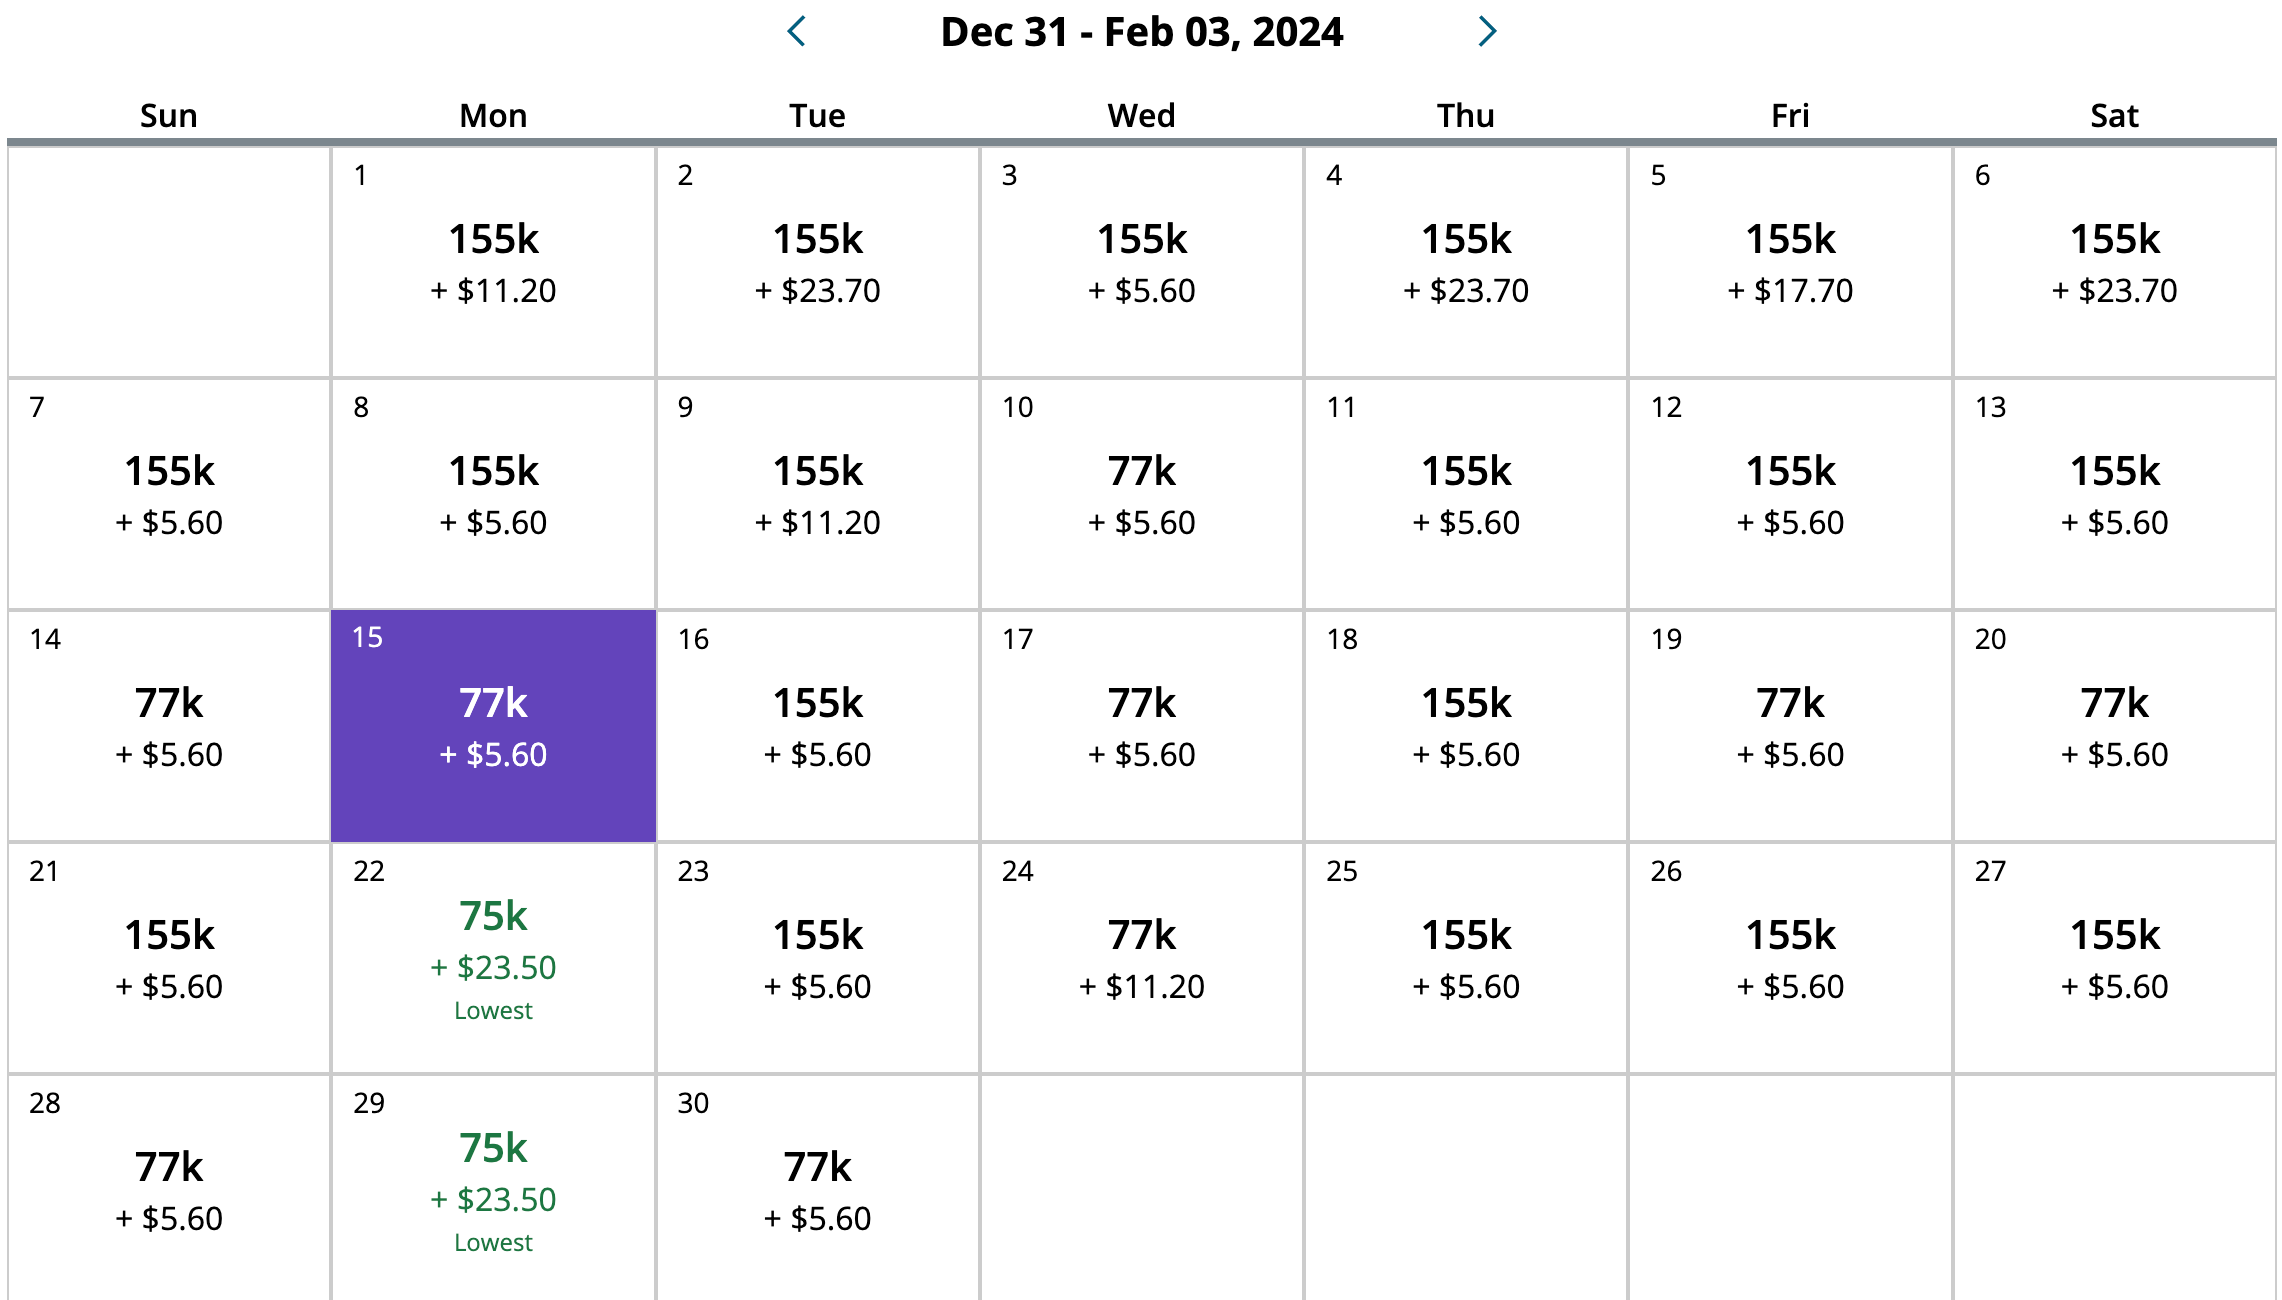 United 30-day award space between SFO and LIS